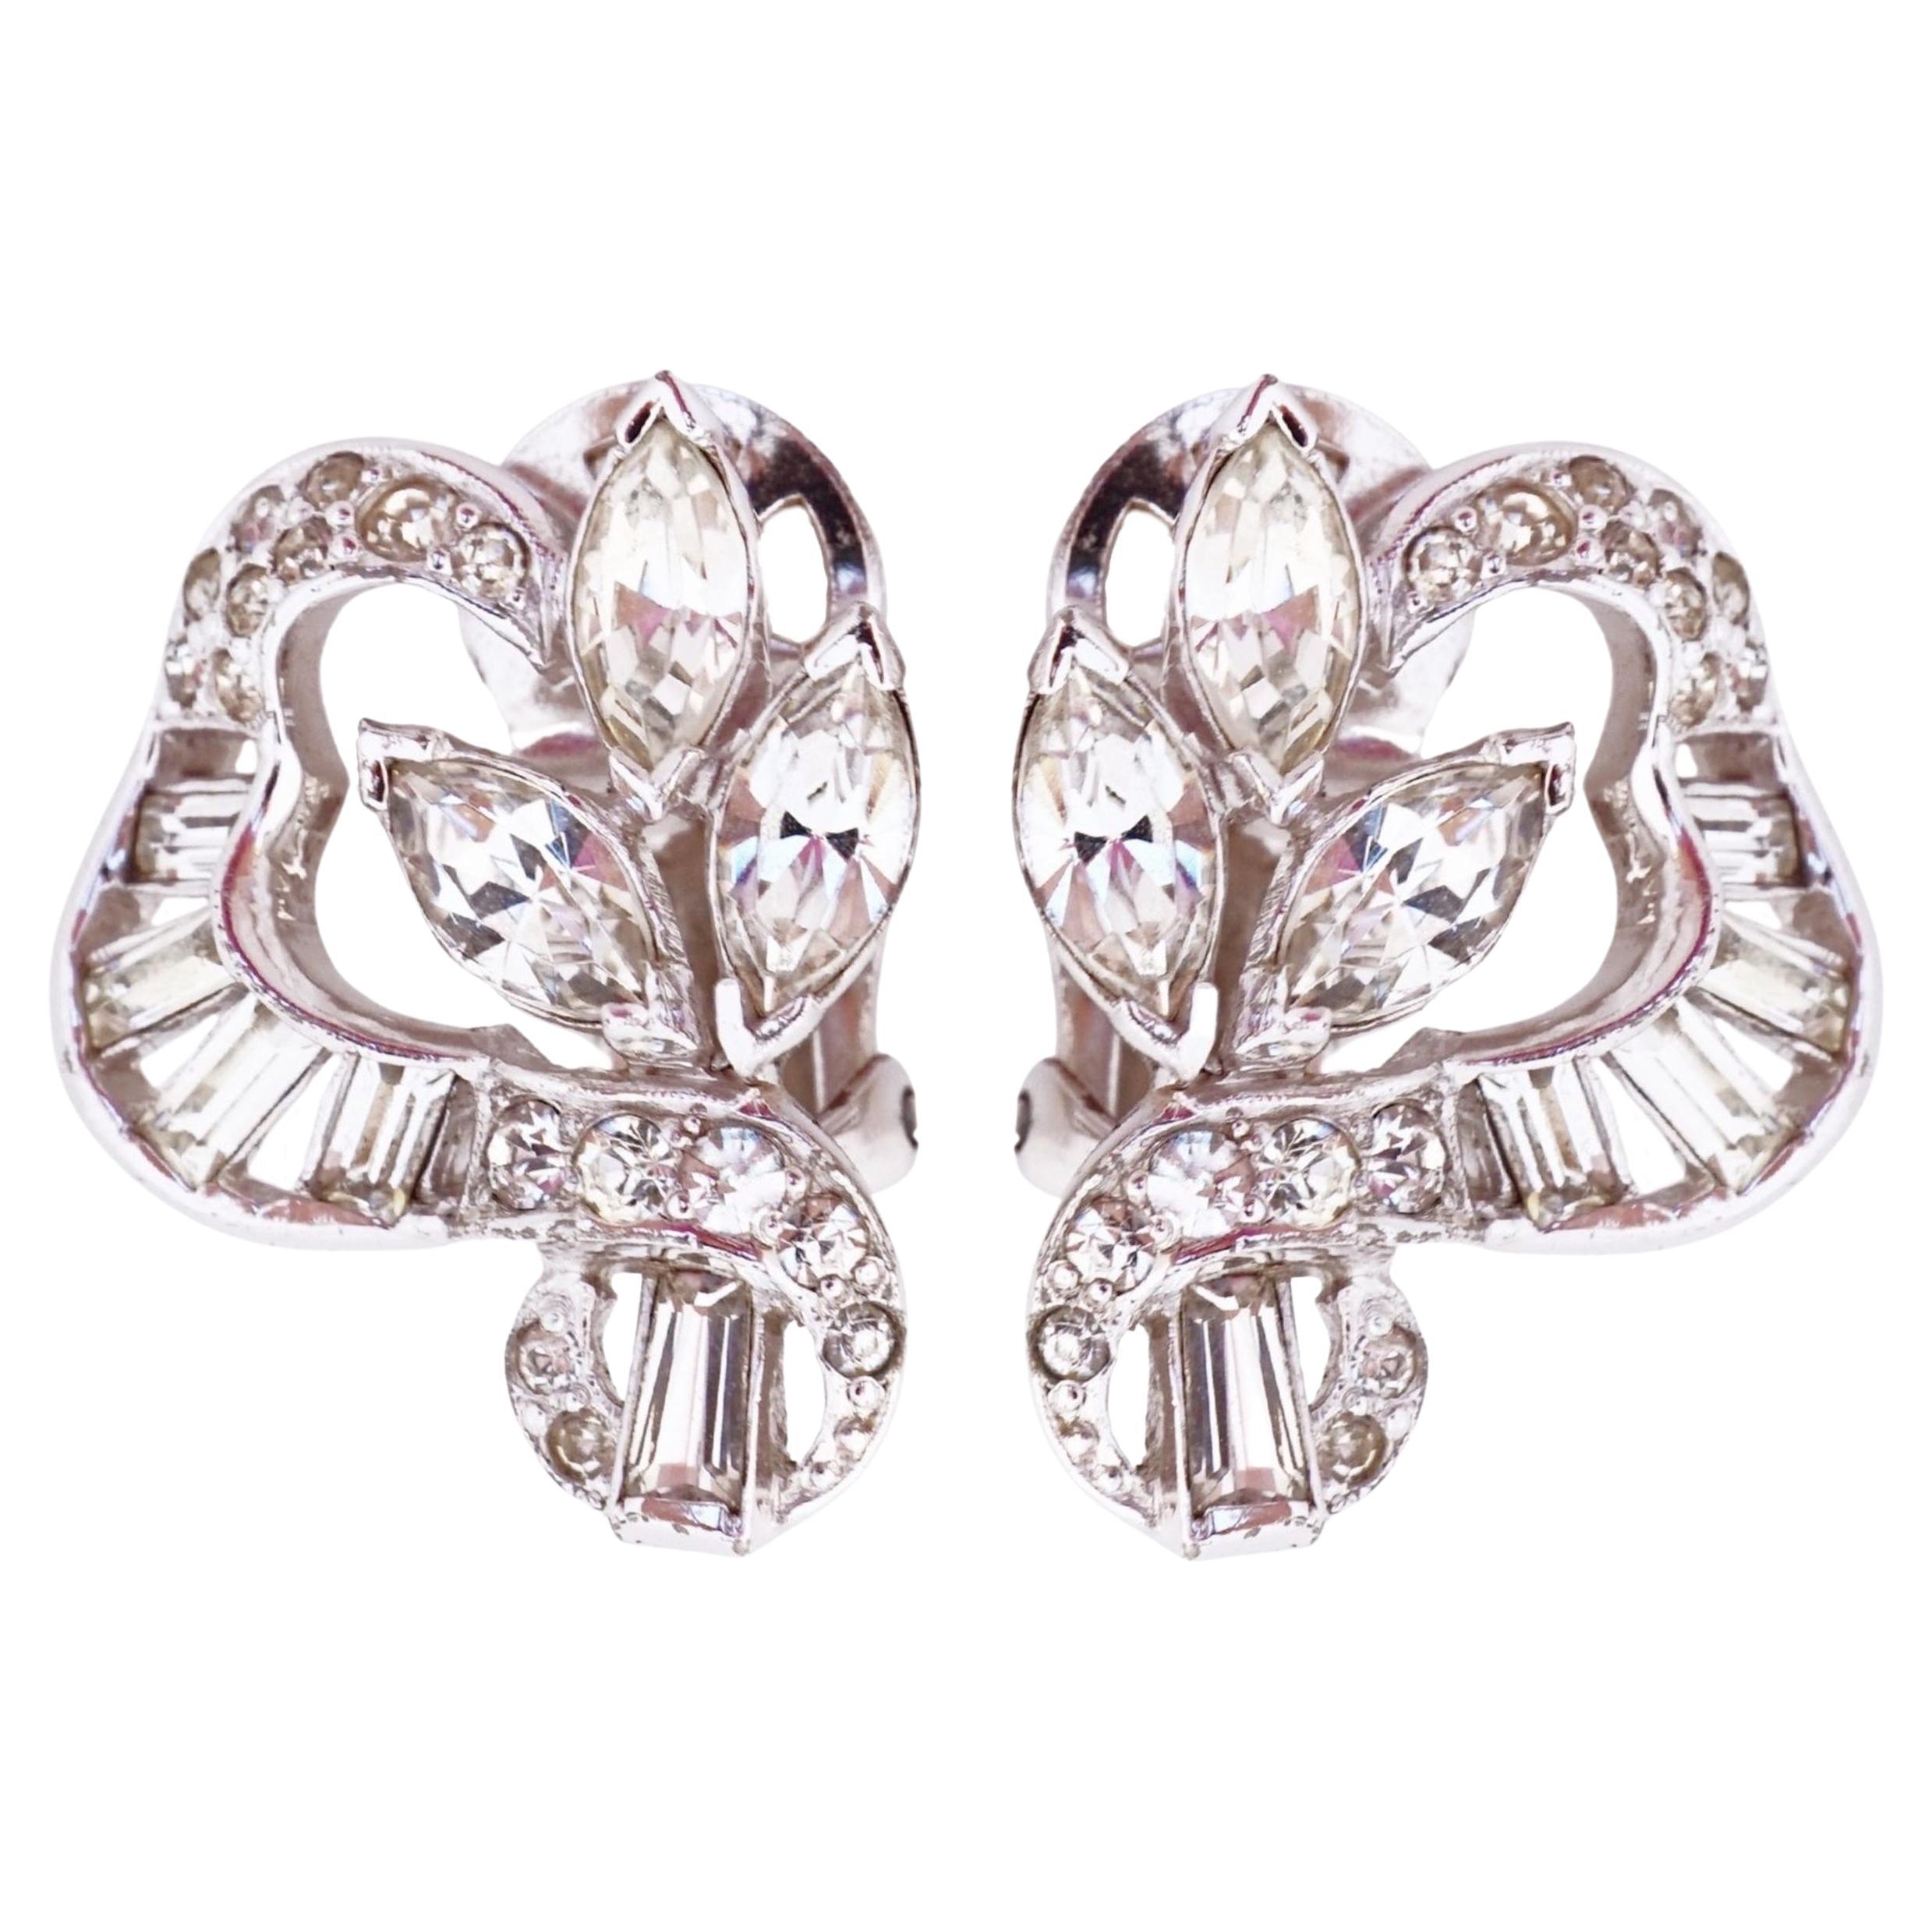 Crystal Baguette and Navette Cocktail Earrings By Mazer Brothers, 1940s For Sale